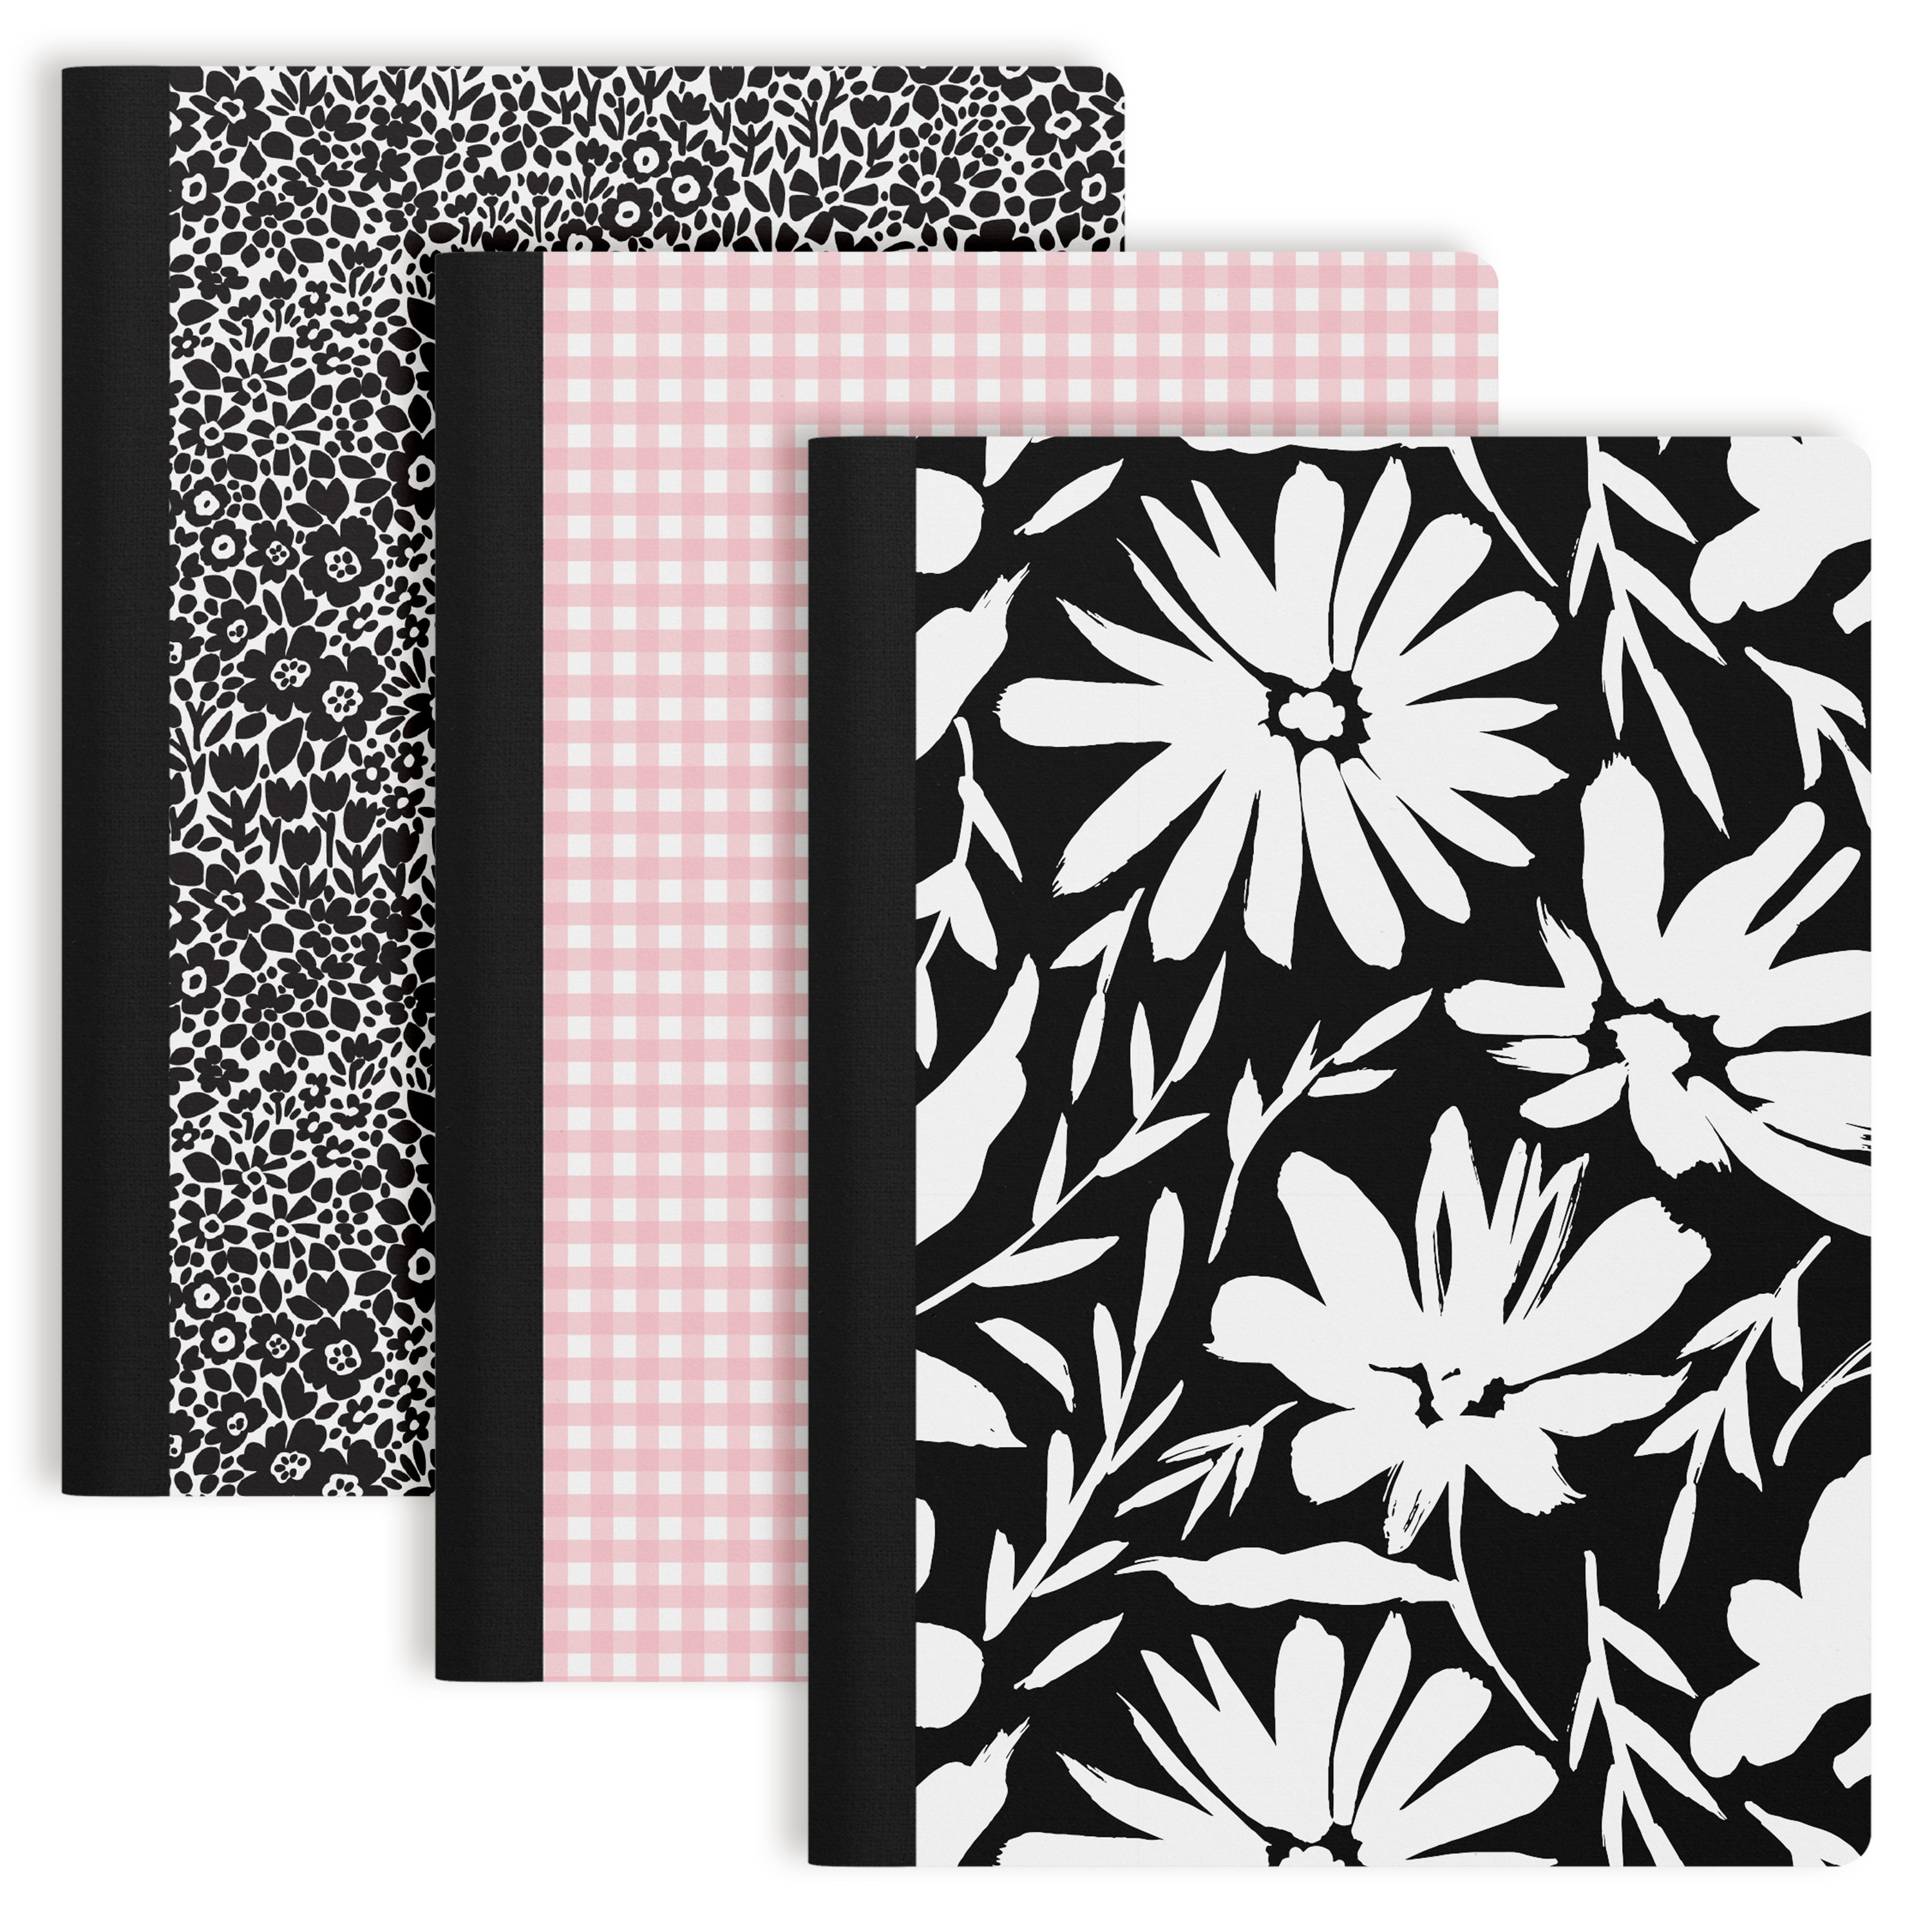 Decorative Cover Composition Notebooks (7.5 in x 10 in)